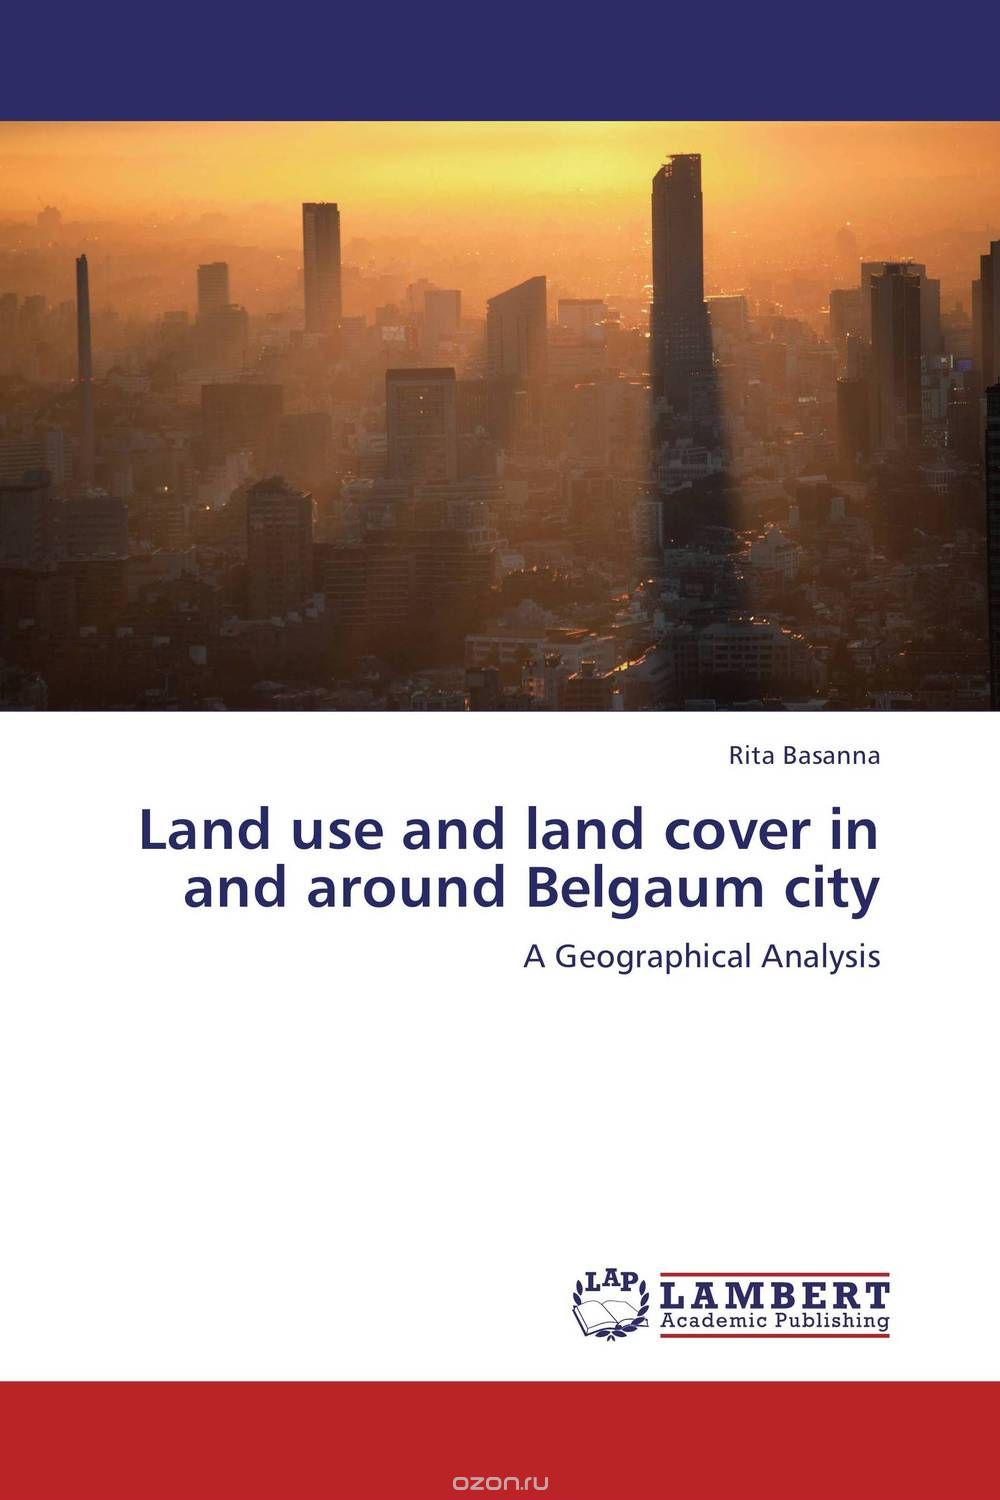 Land use and land cover in and around Belgaum city